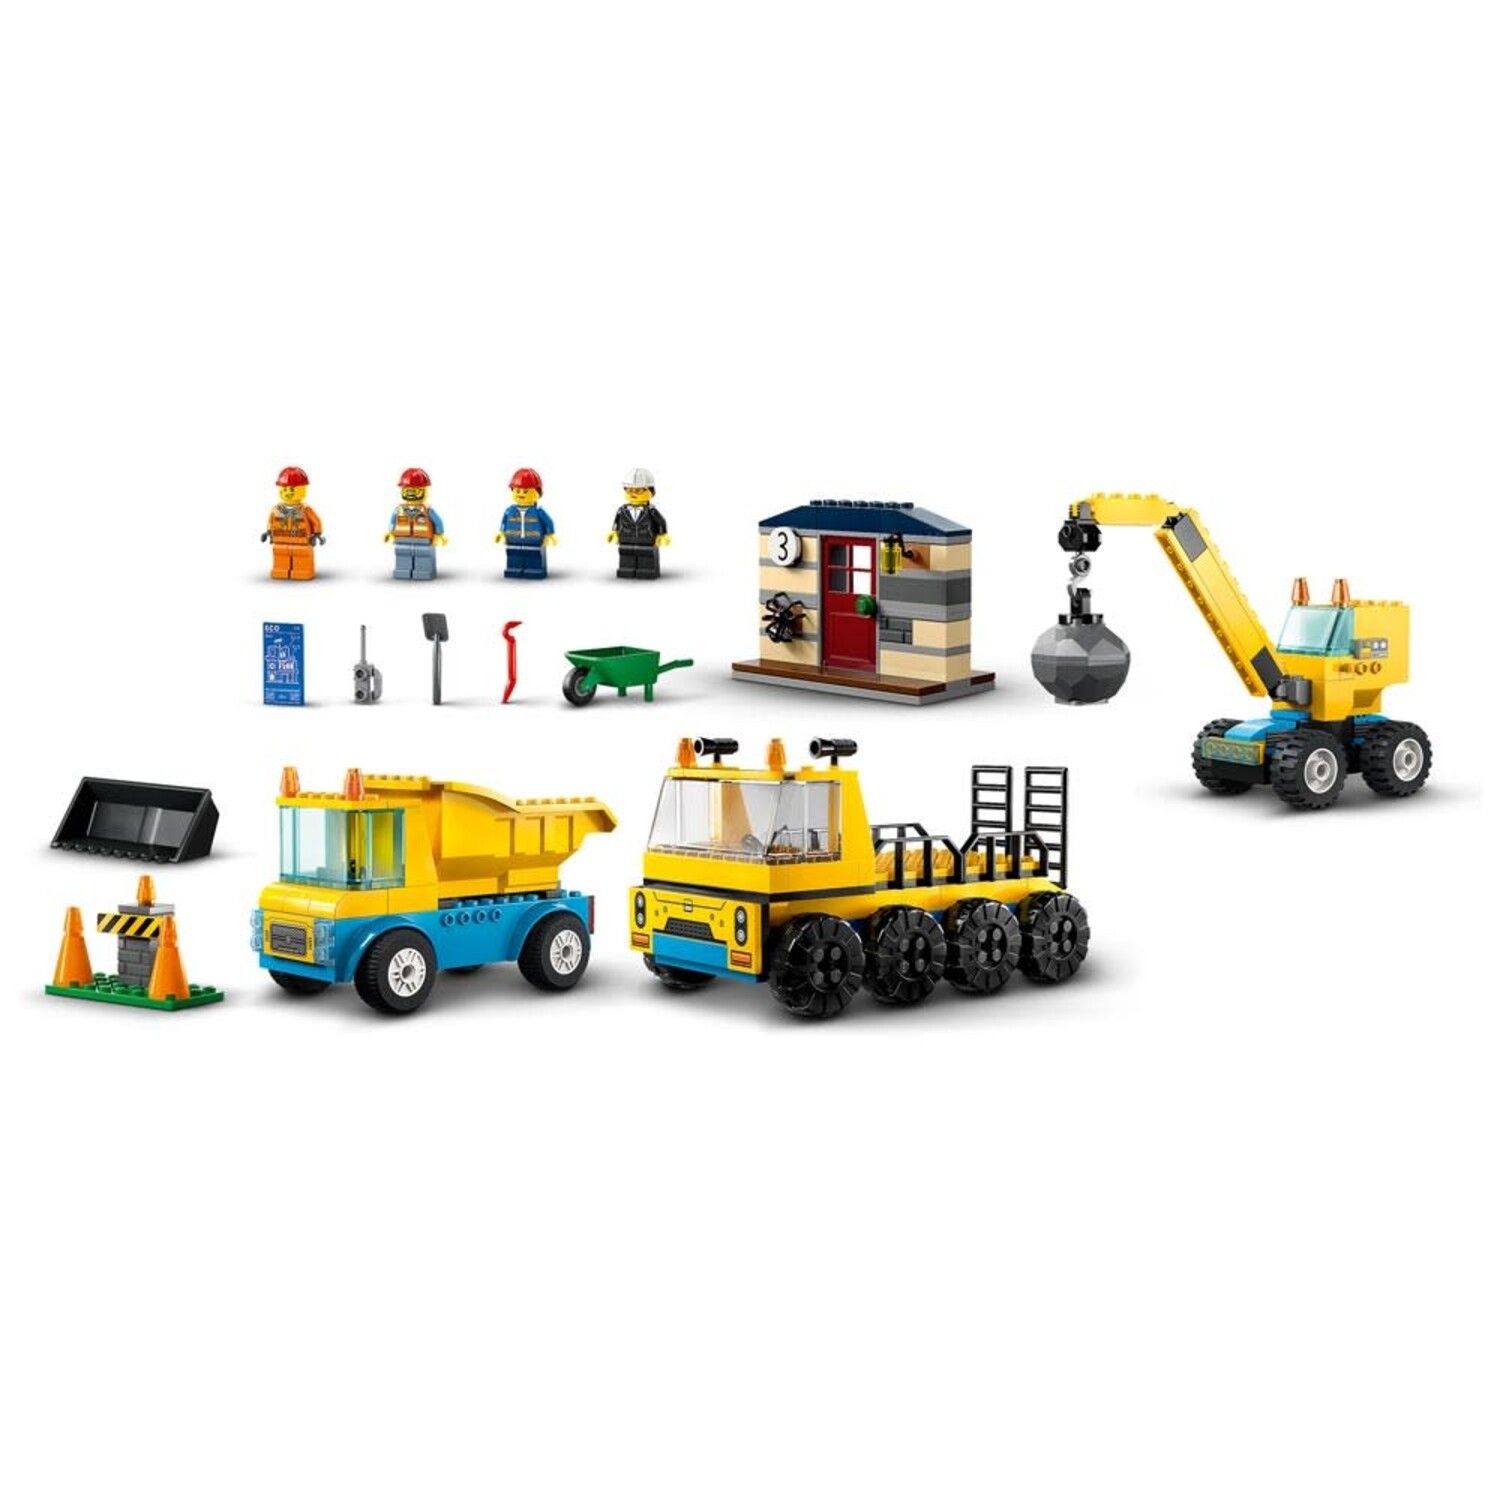 LEGO® City Construction Trucks and Wrecking Ball Crane 60391 – Growing Tree  Toys